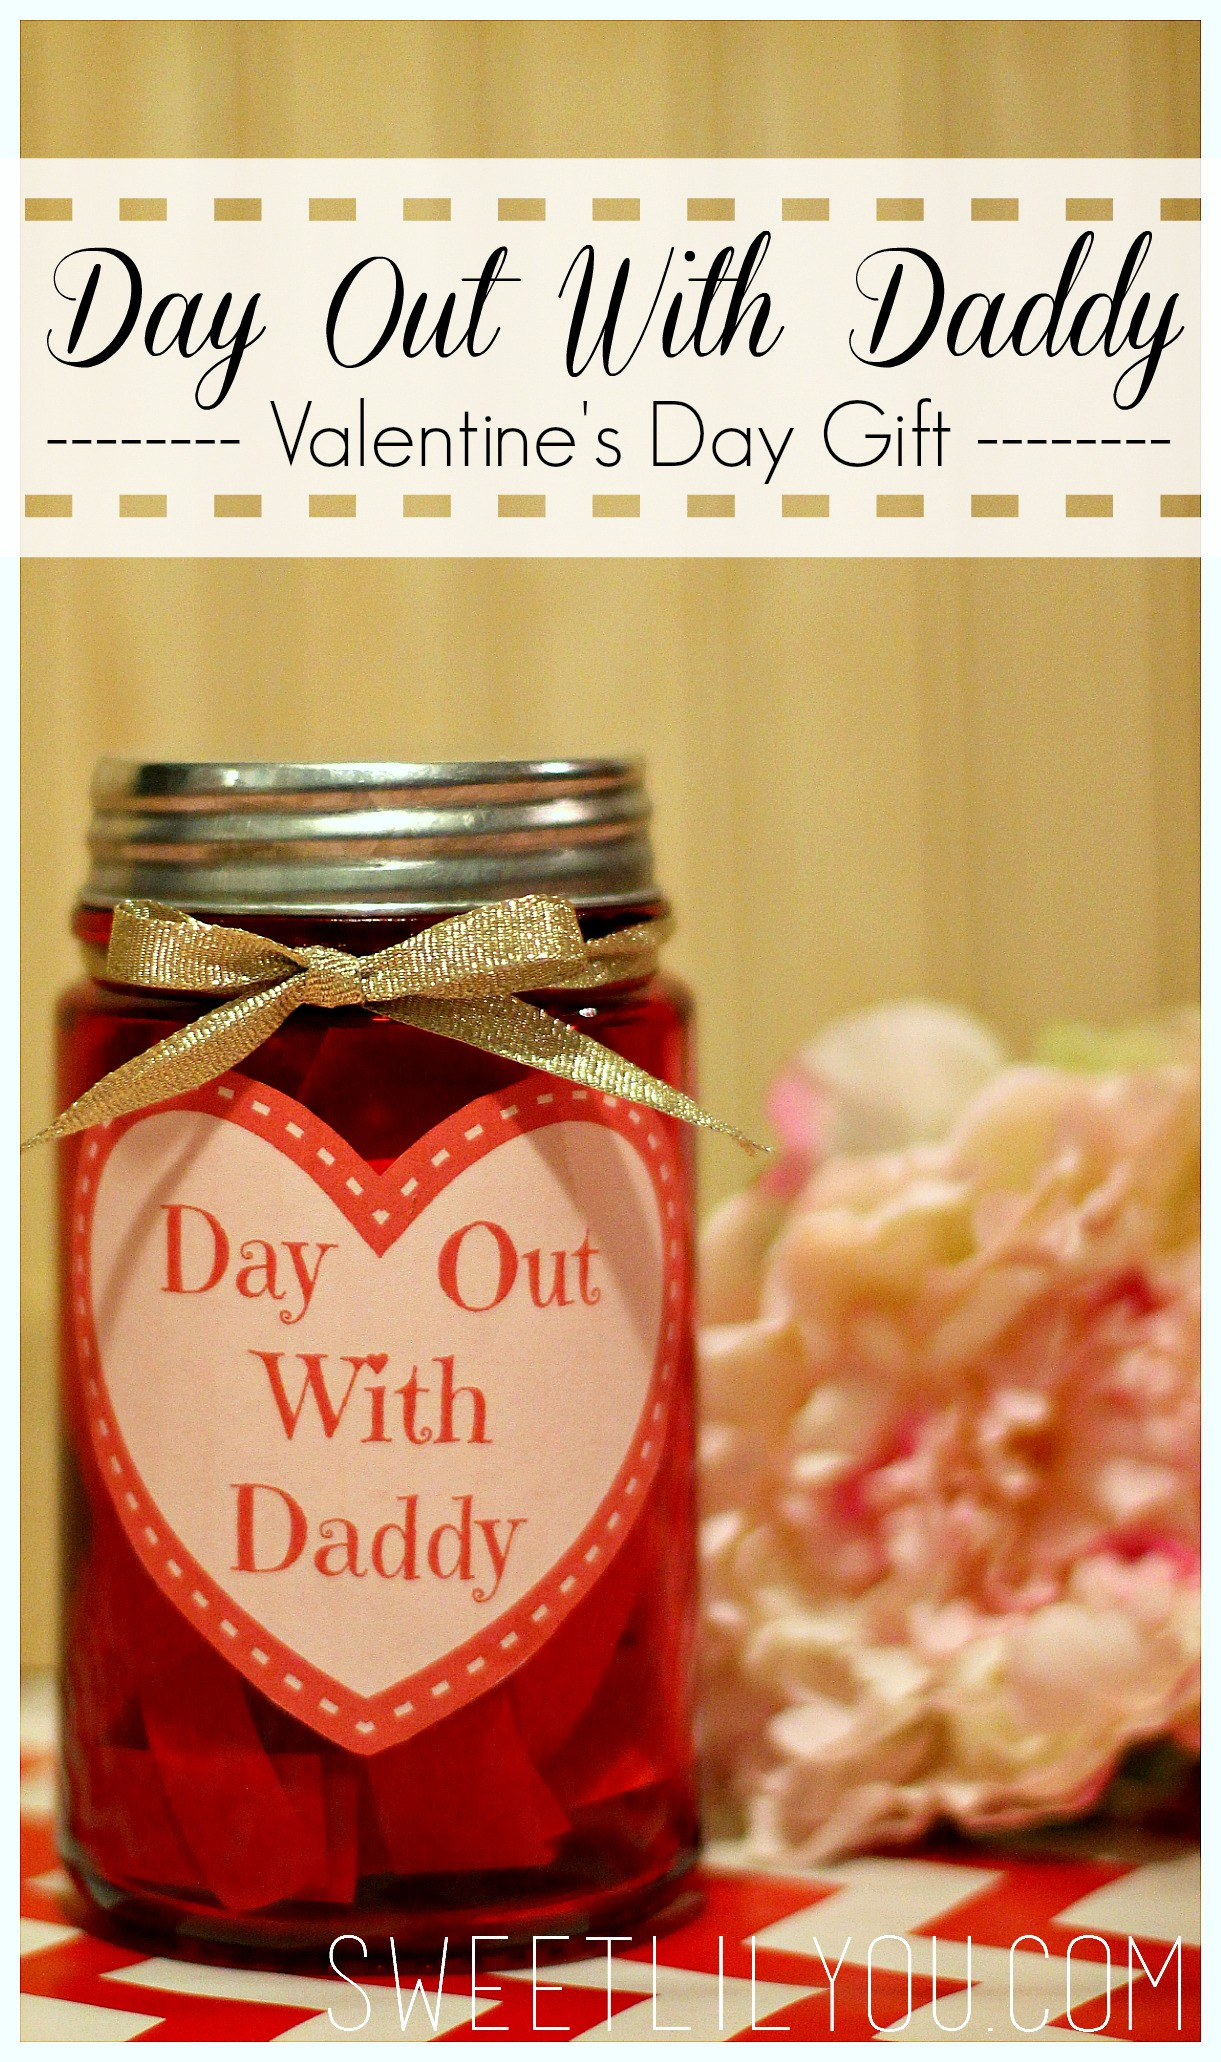 Valentines Day Gifts for Daddy Inspirational Day Out with Daddy Jar Valentine S Day Gift for Dad